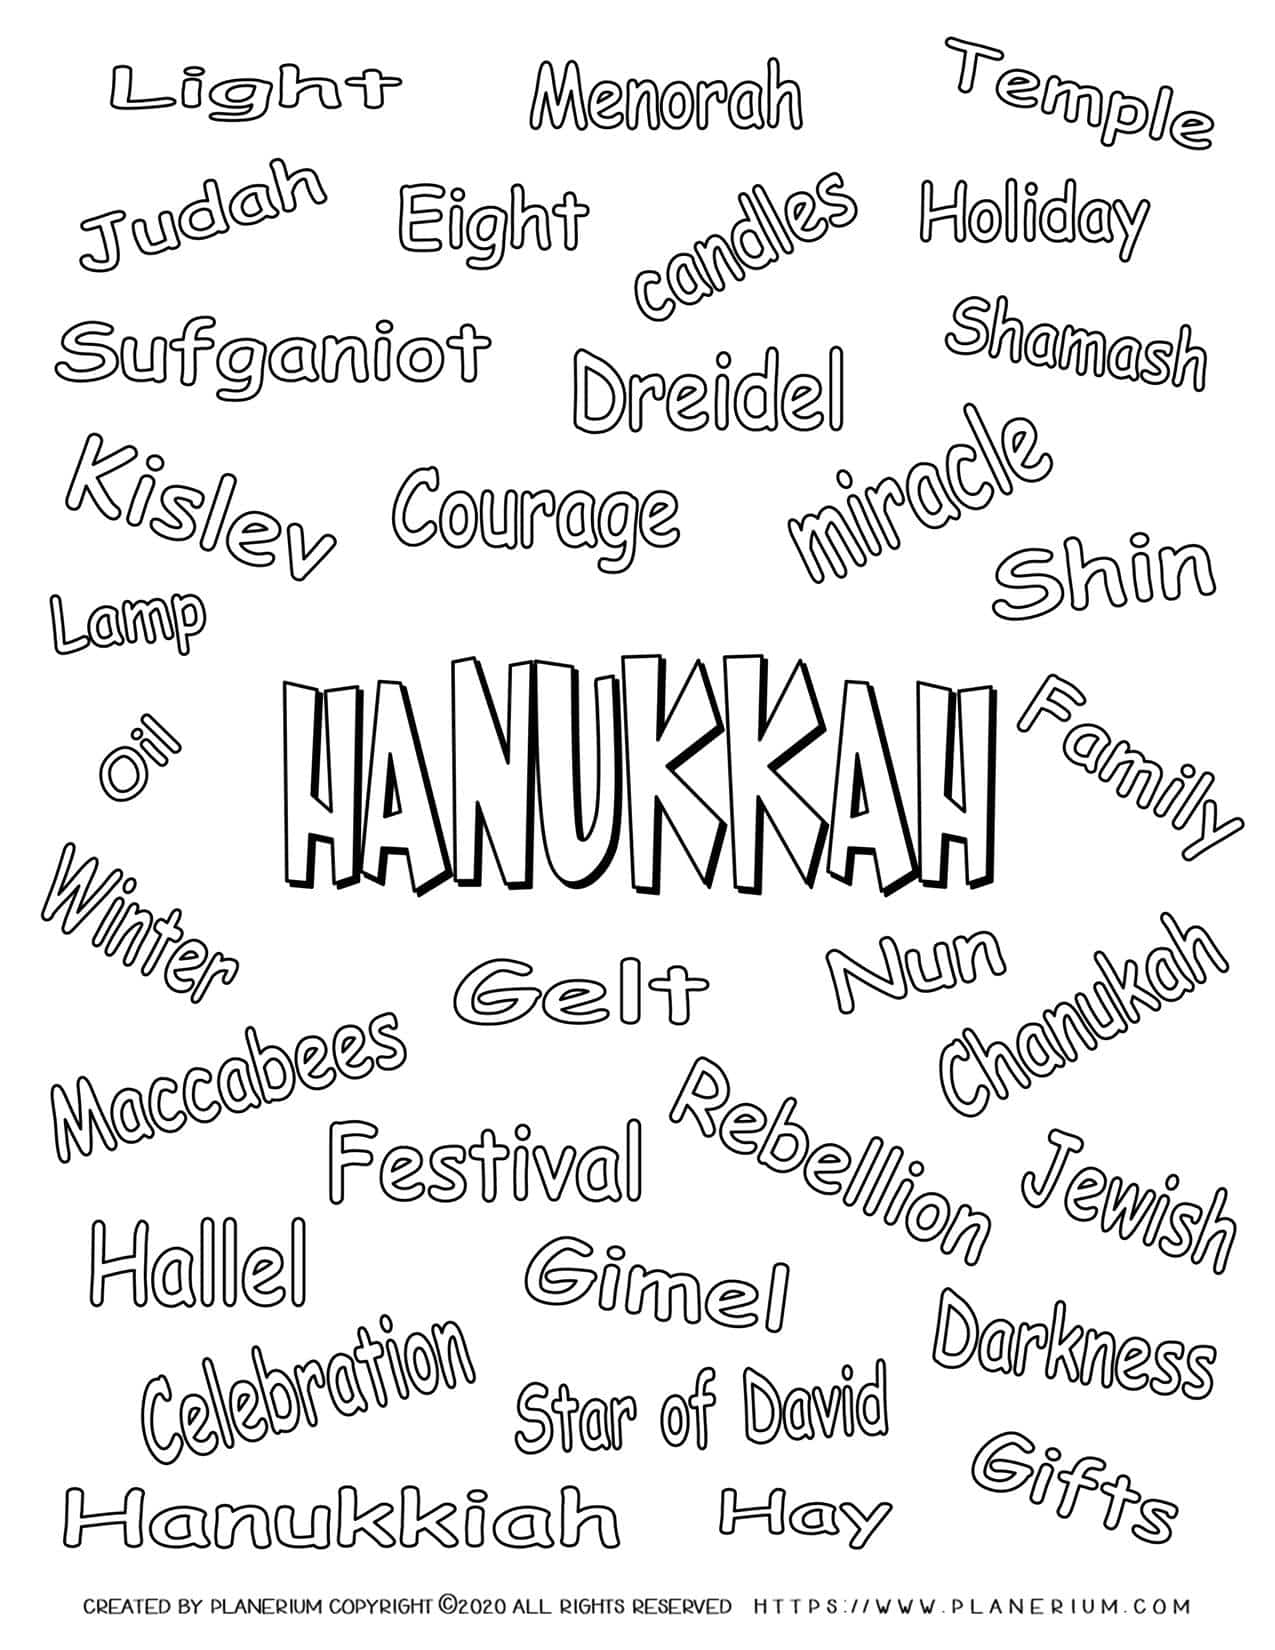 Hanukkah Coloring Pages - Related Words - Free Printable | Planerium